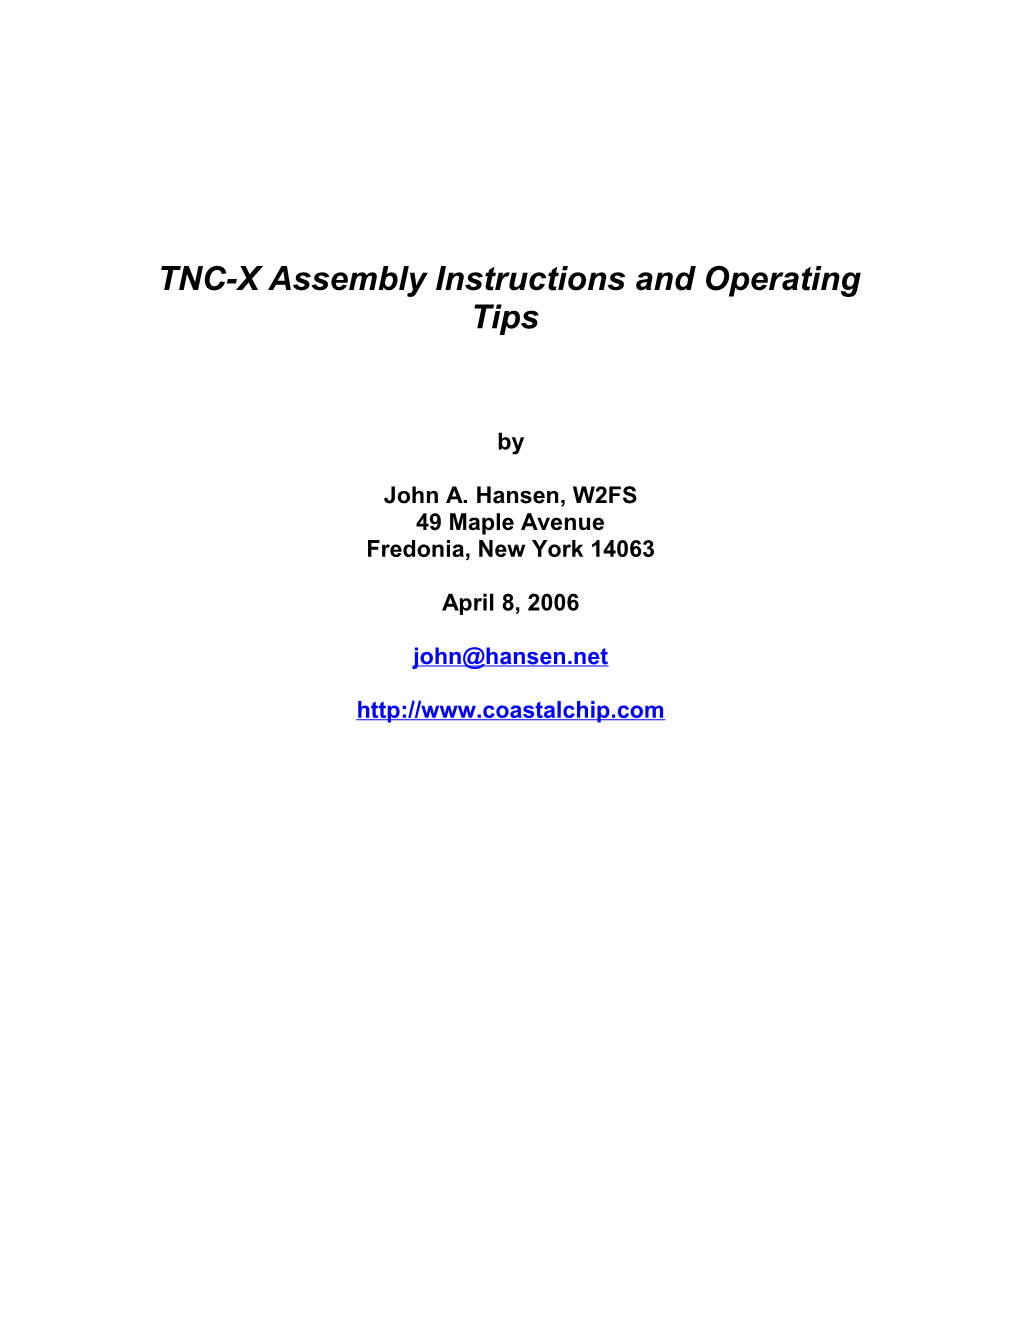 TNC-X Assembly Instructions and Operating Tips